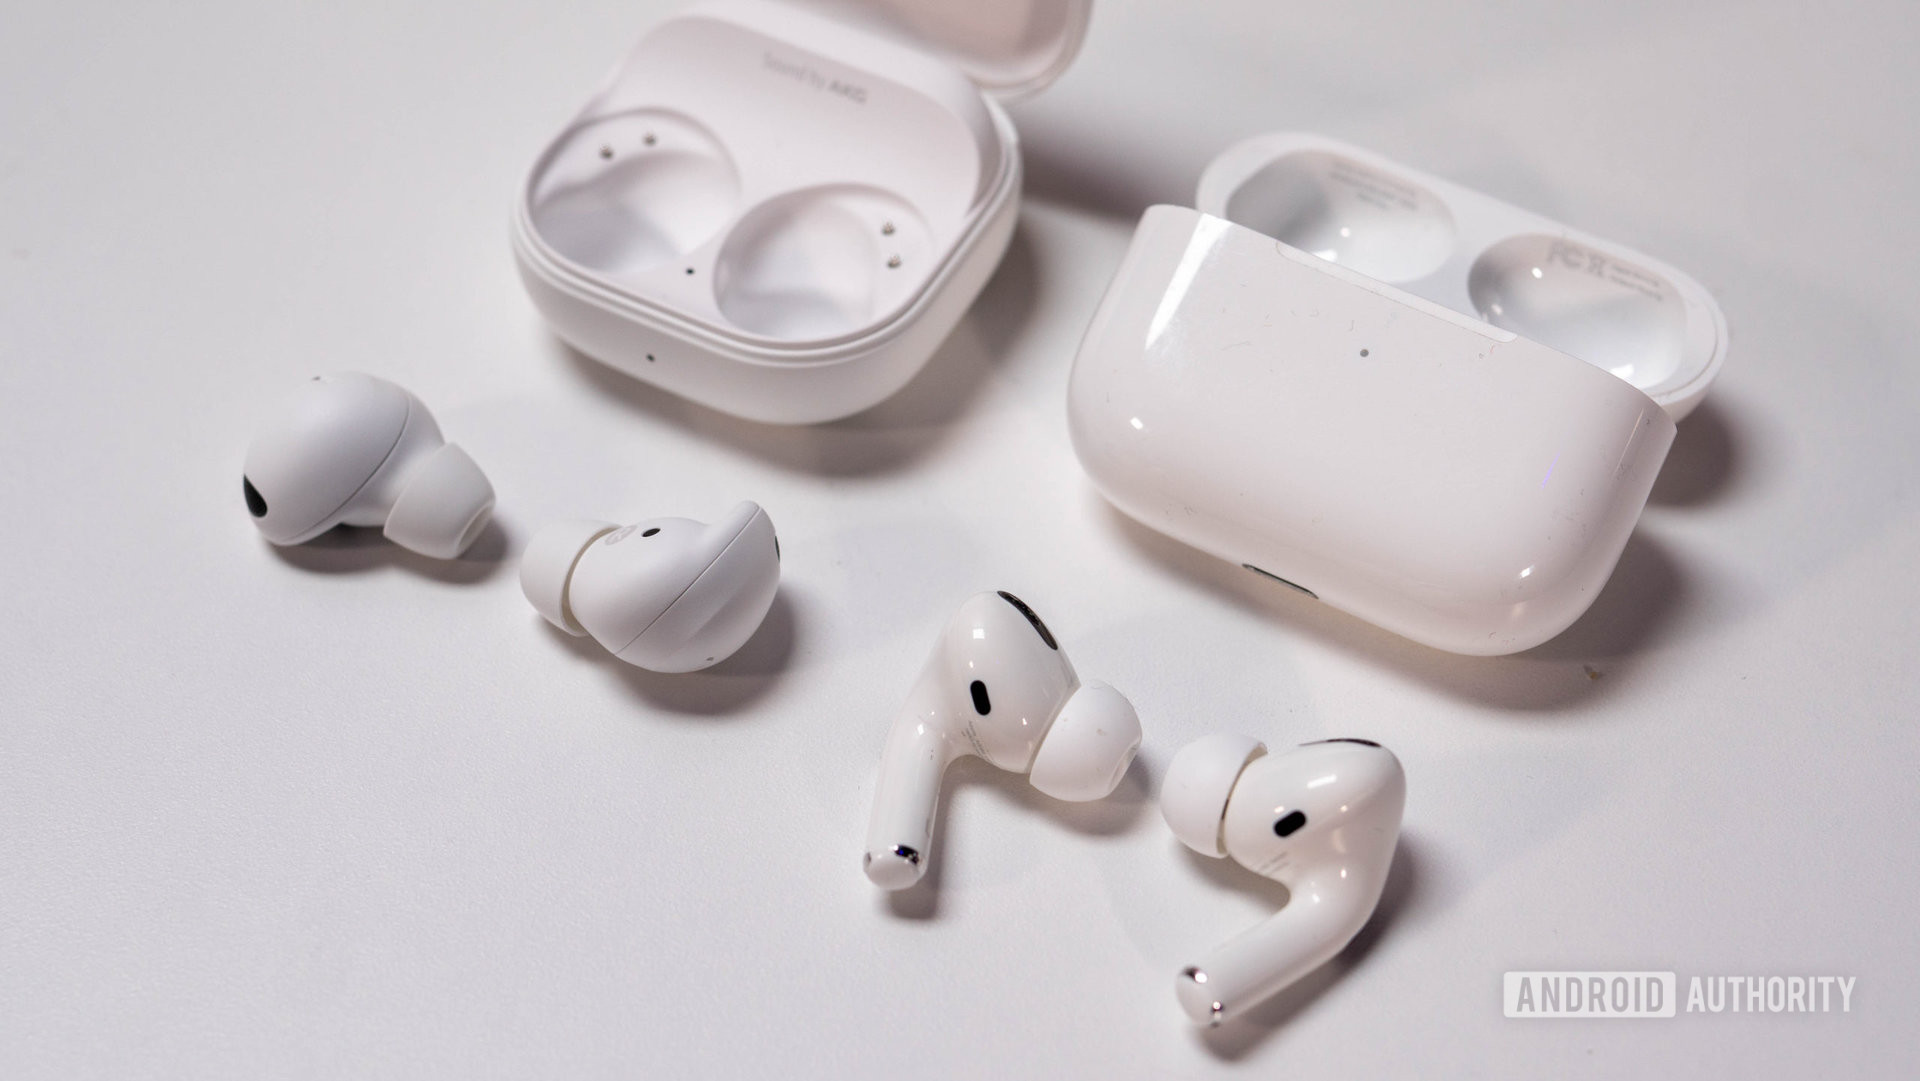 Samsung Galaxy Buds 2 Pro vs AirPods Pro next to the charging case close-up